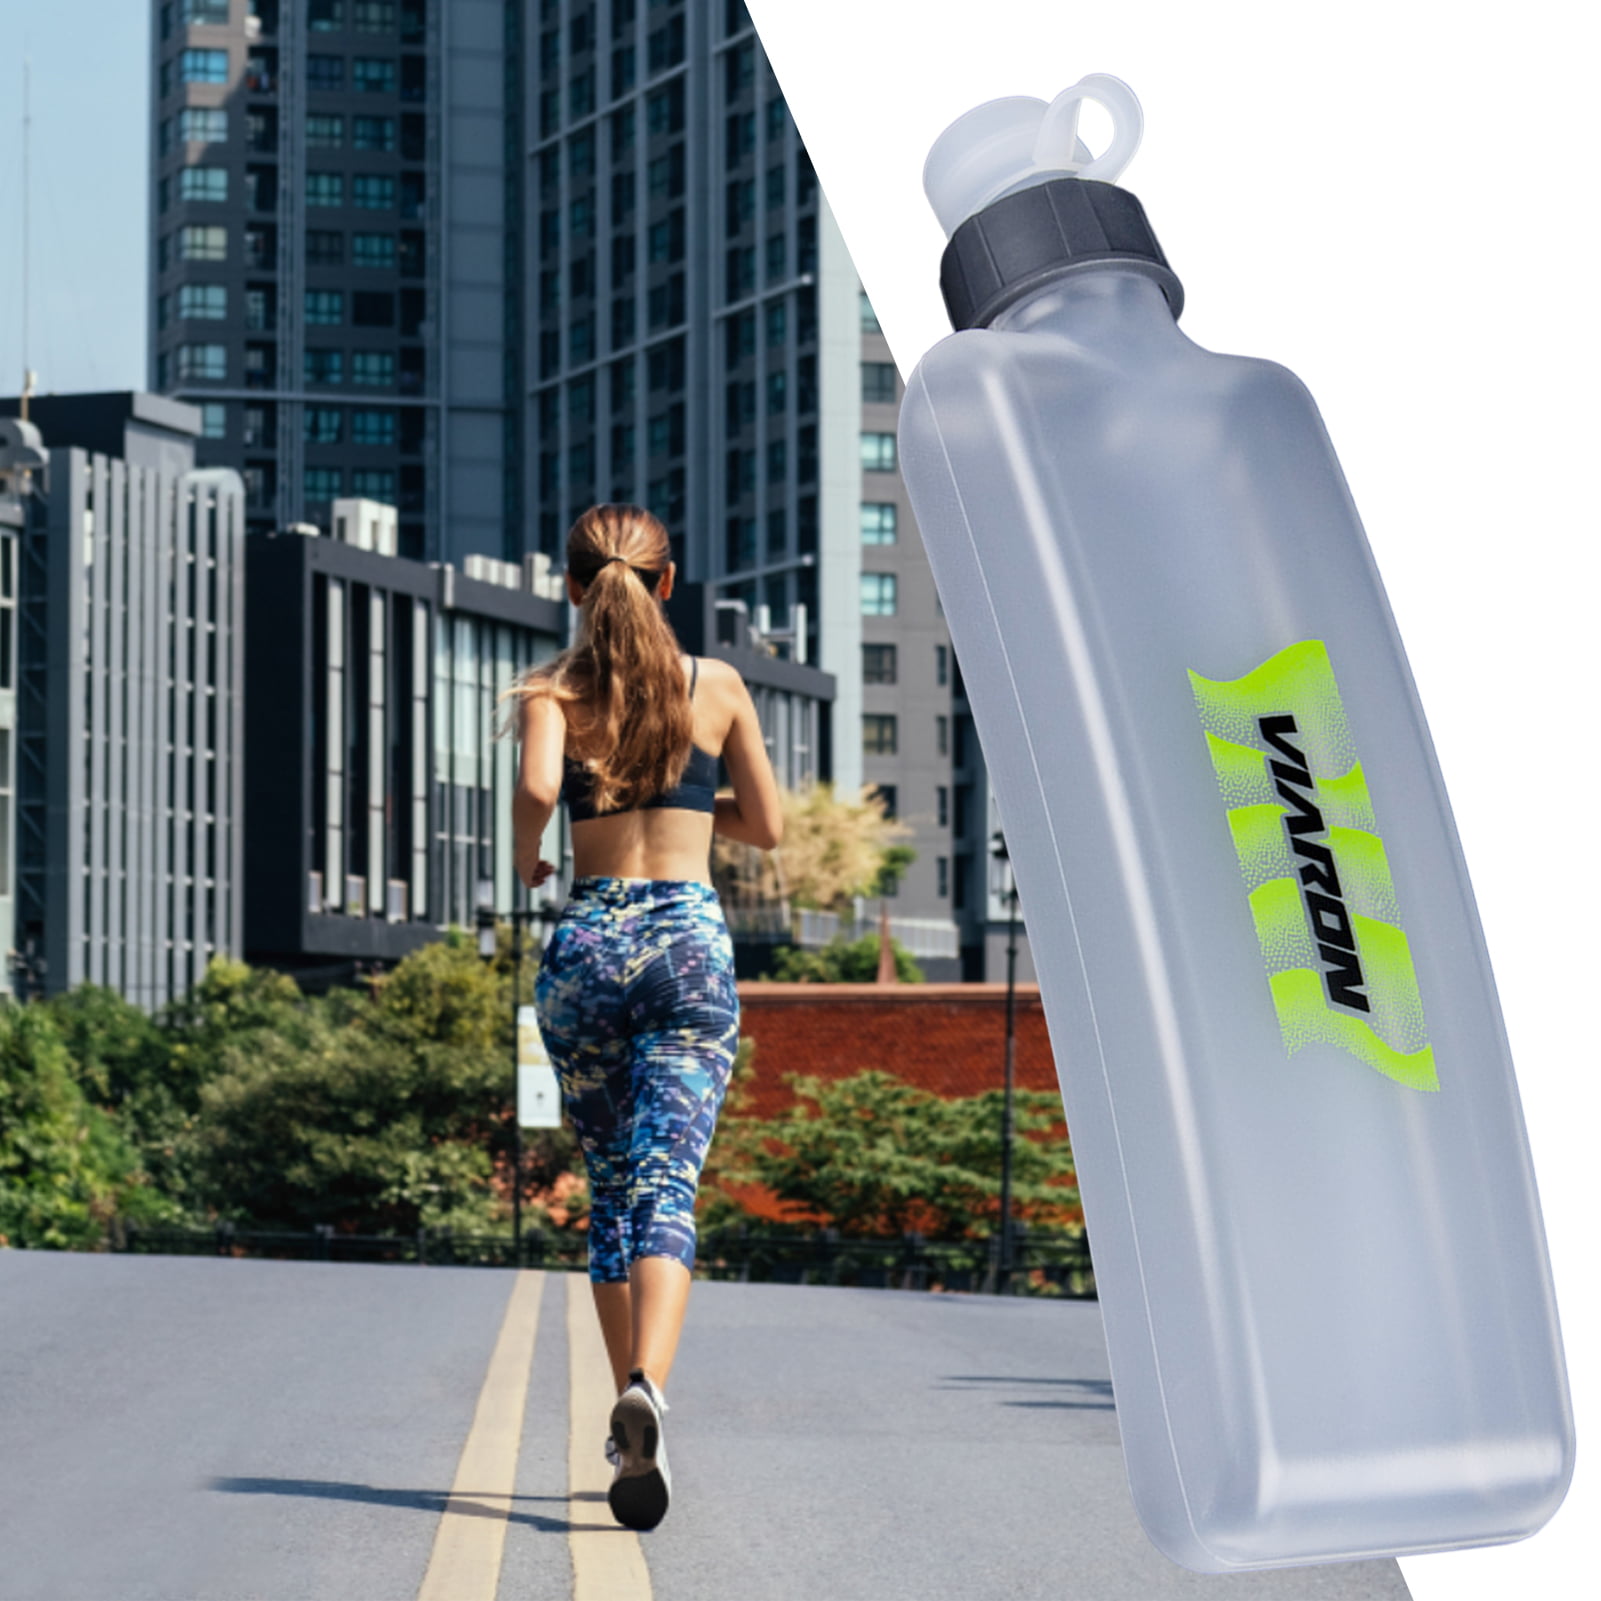 Hesroicy 400ML Water Bottle Design with Push Pull Spout Large Capacity Wear  resistant Dust proof Cover Drinking Leak proof Fanny Pack Sports Bottle for  Sports 